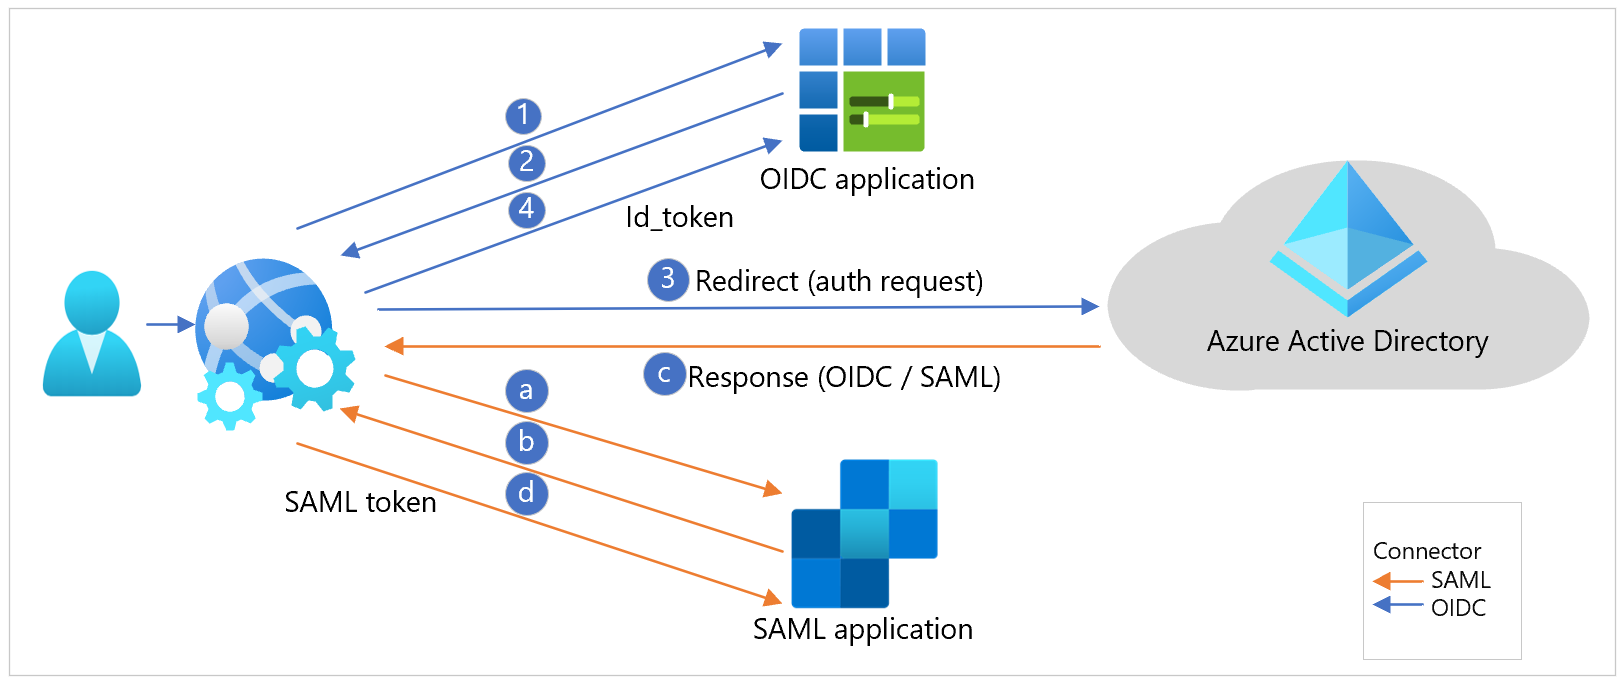 image shows the OIDC and SAML implementation